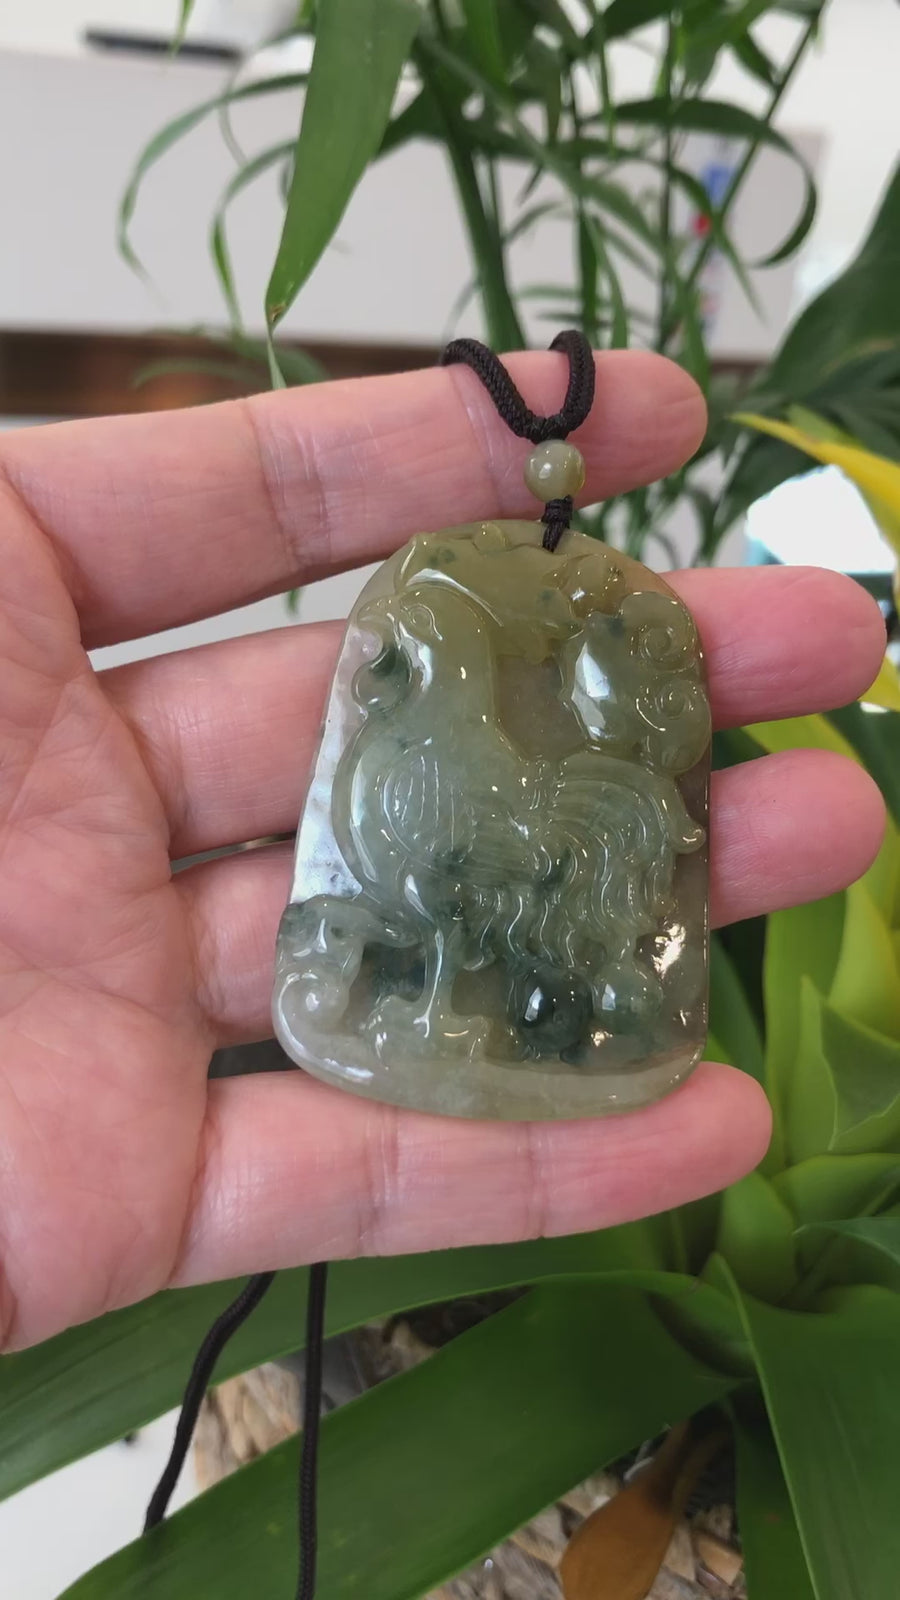 Natural Honey Yellow Jadeite Jade "Rooster" Pendant Necklace For Men, Collectibles.